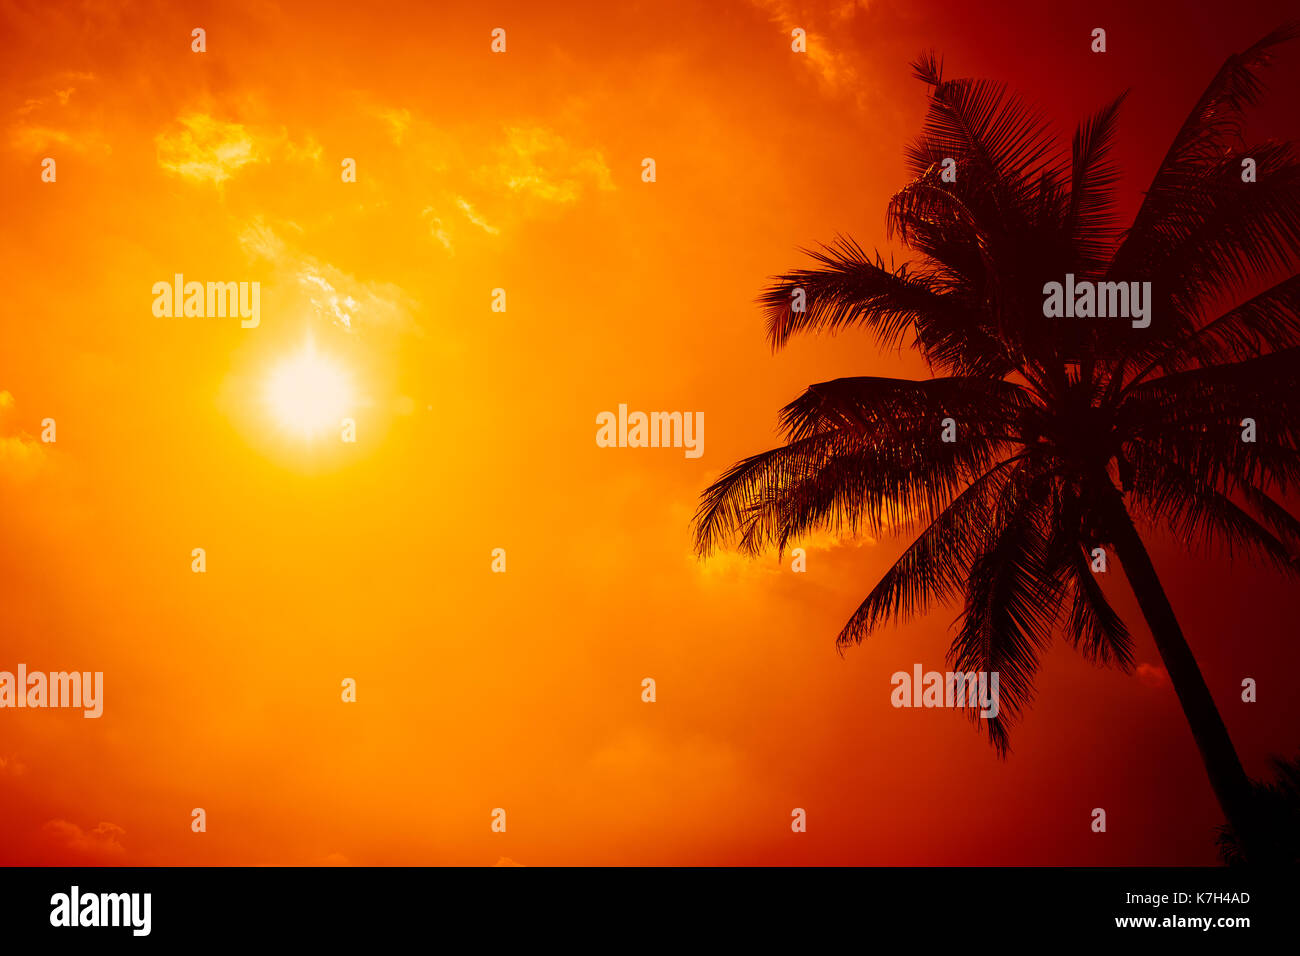 summer season at the beach, silhouette palm tree with clear sunny sky with extreme hot sunshine day background. Stock Photo